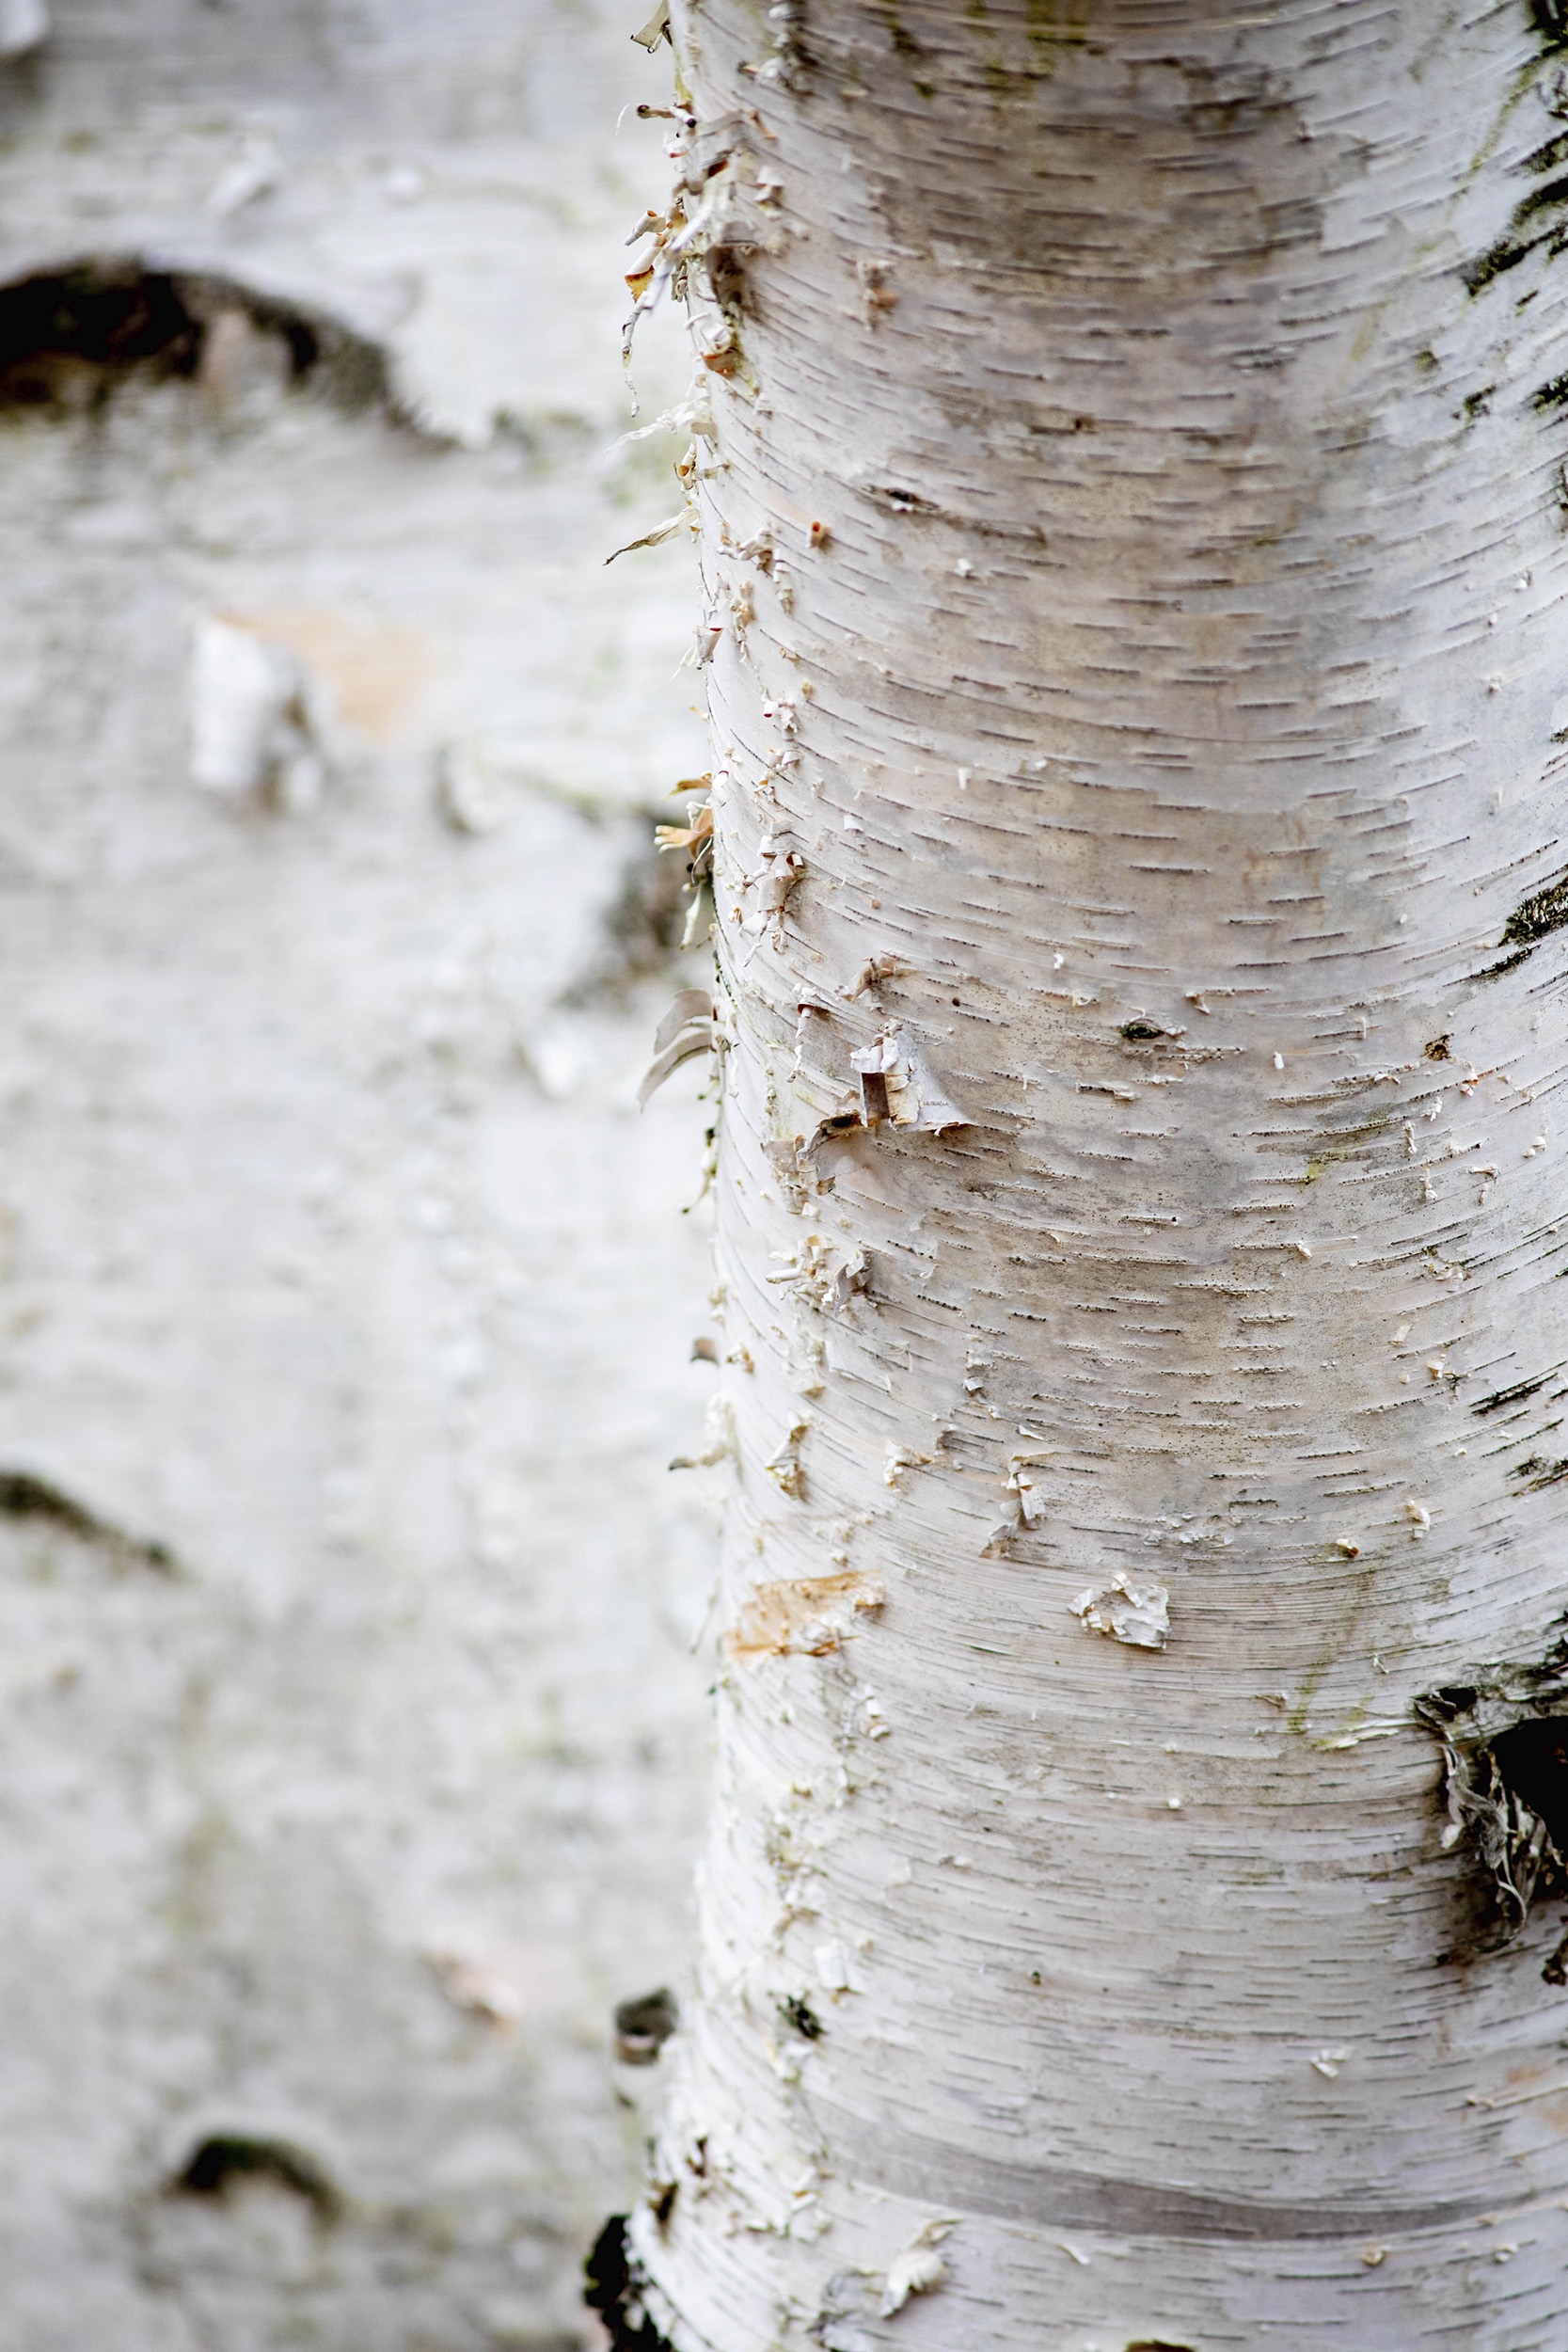 The bark of a birch (Betula) at Arnold Arboretum.